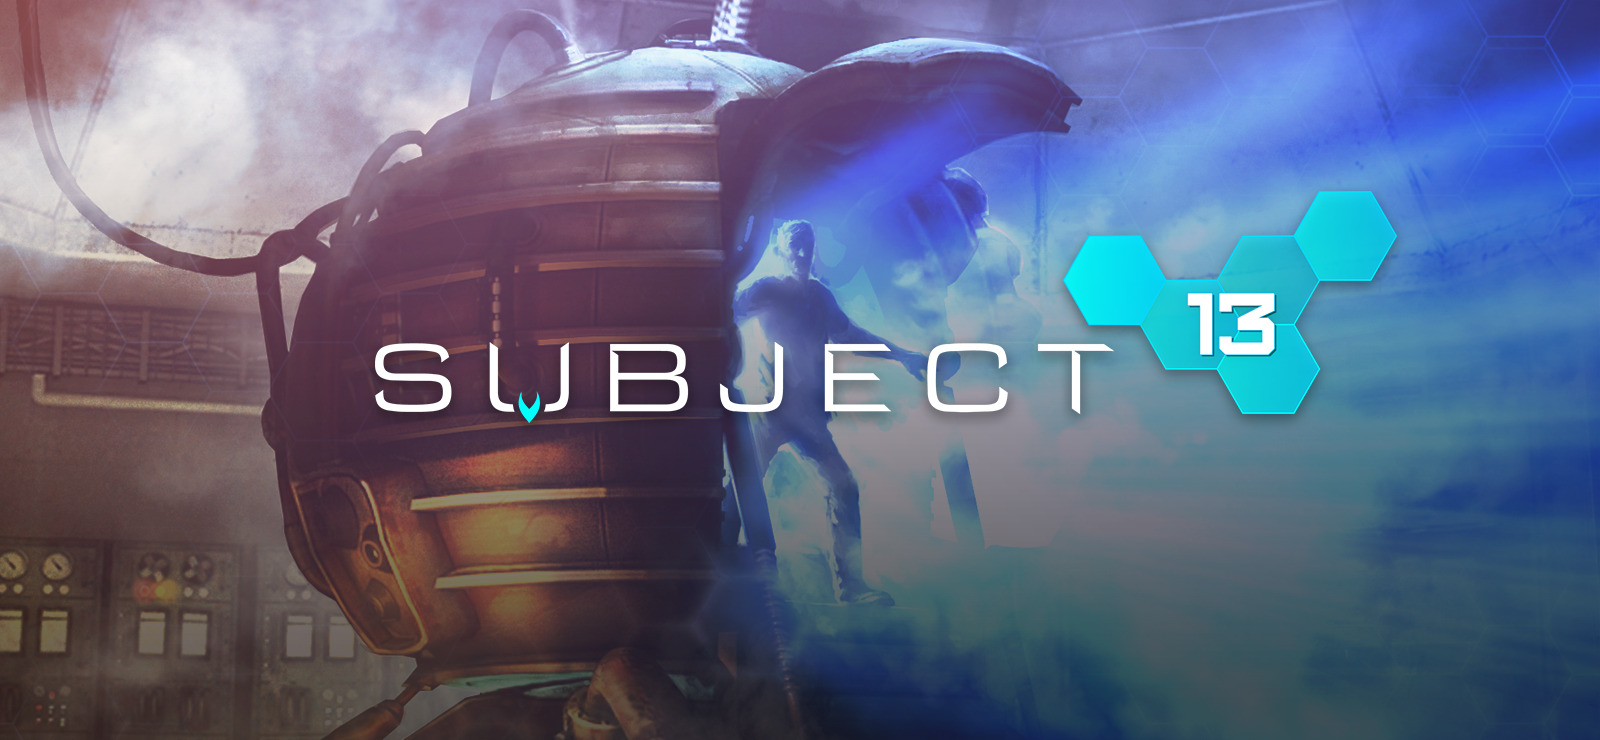 Subject 13. Steam subjects. Subject 8.2.6. R. E subject.